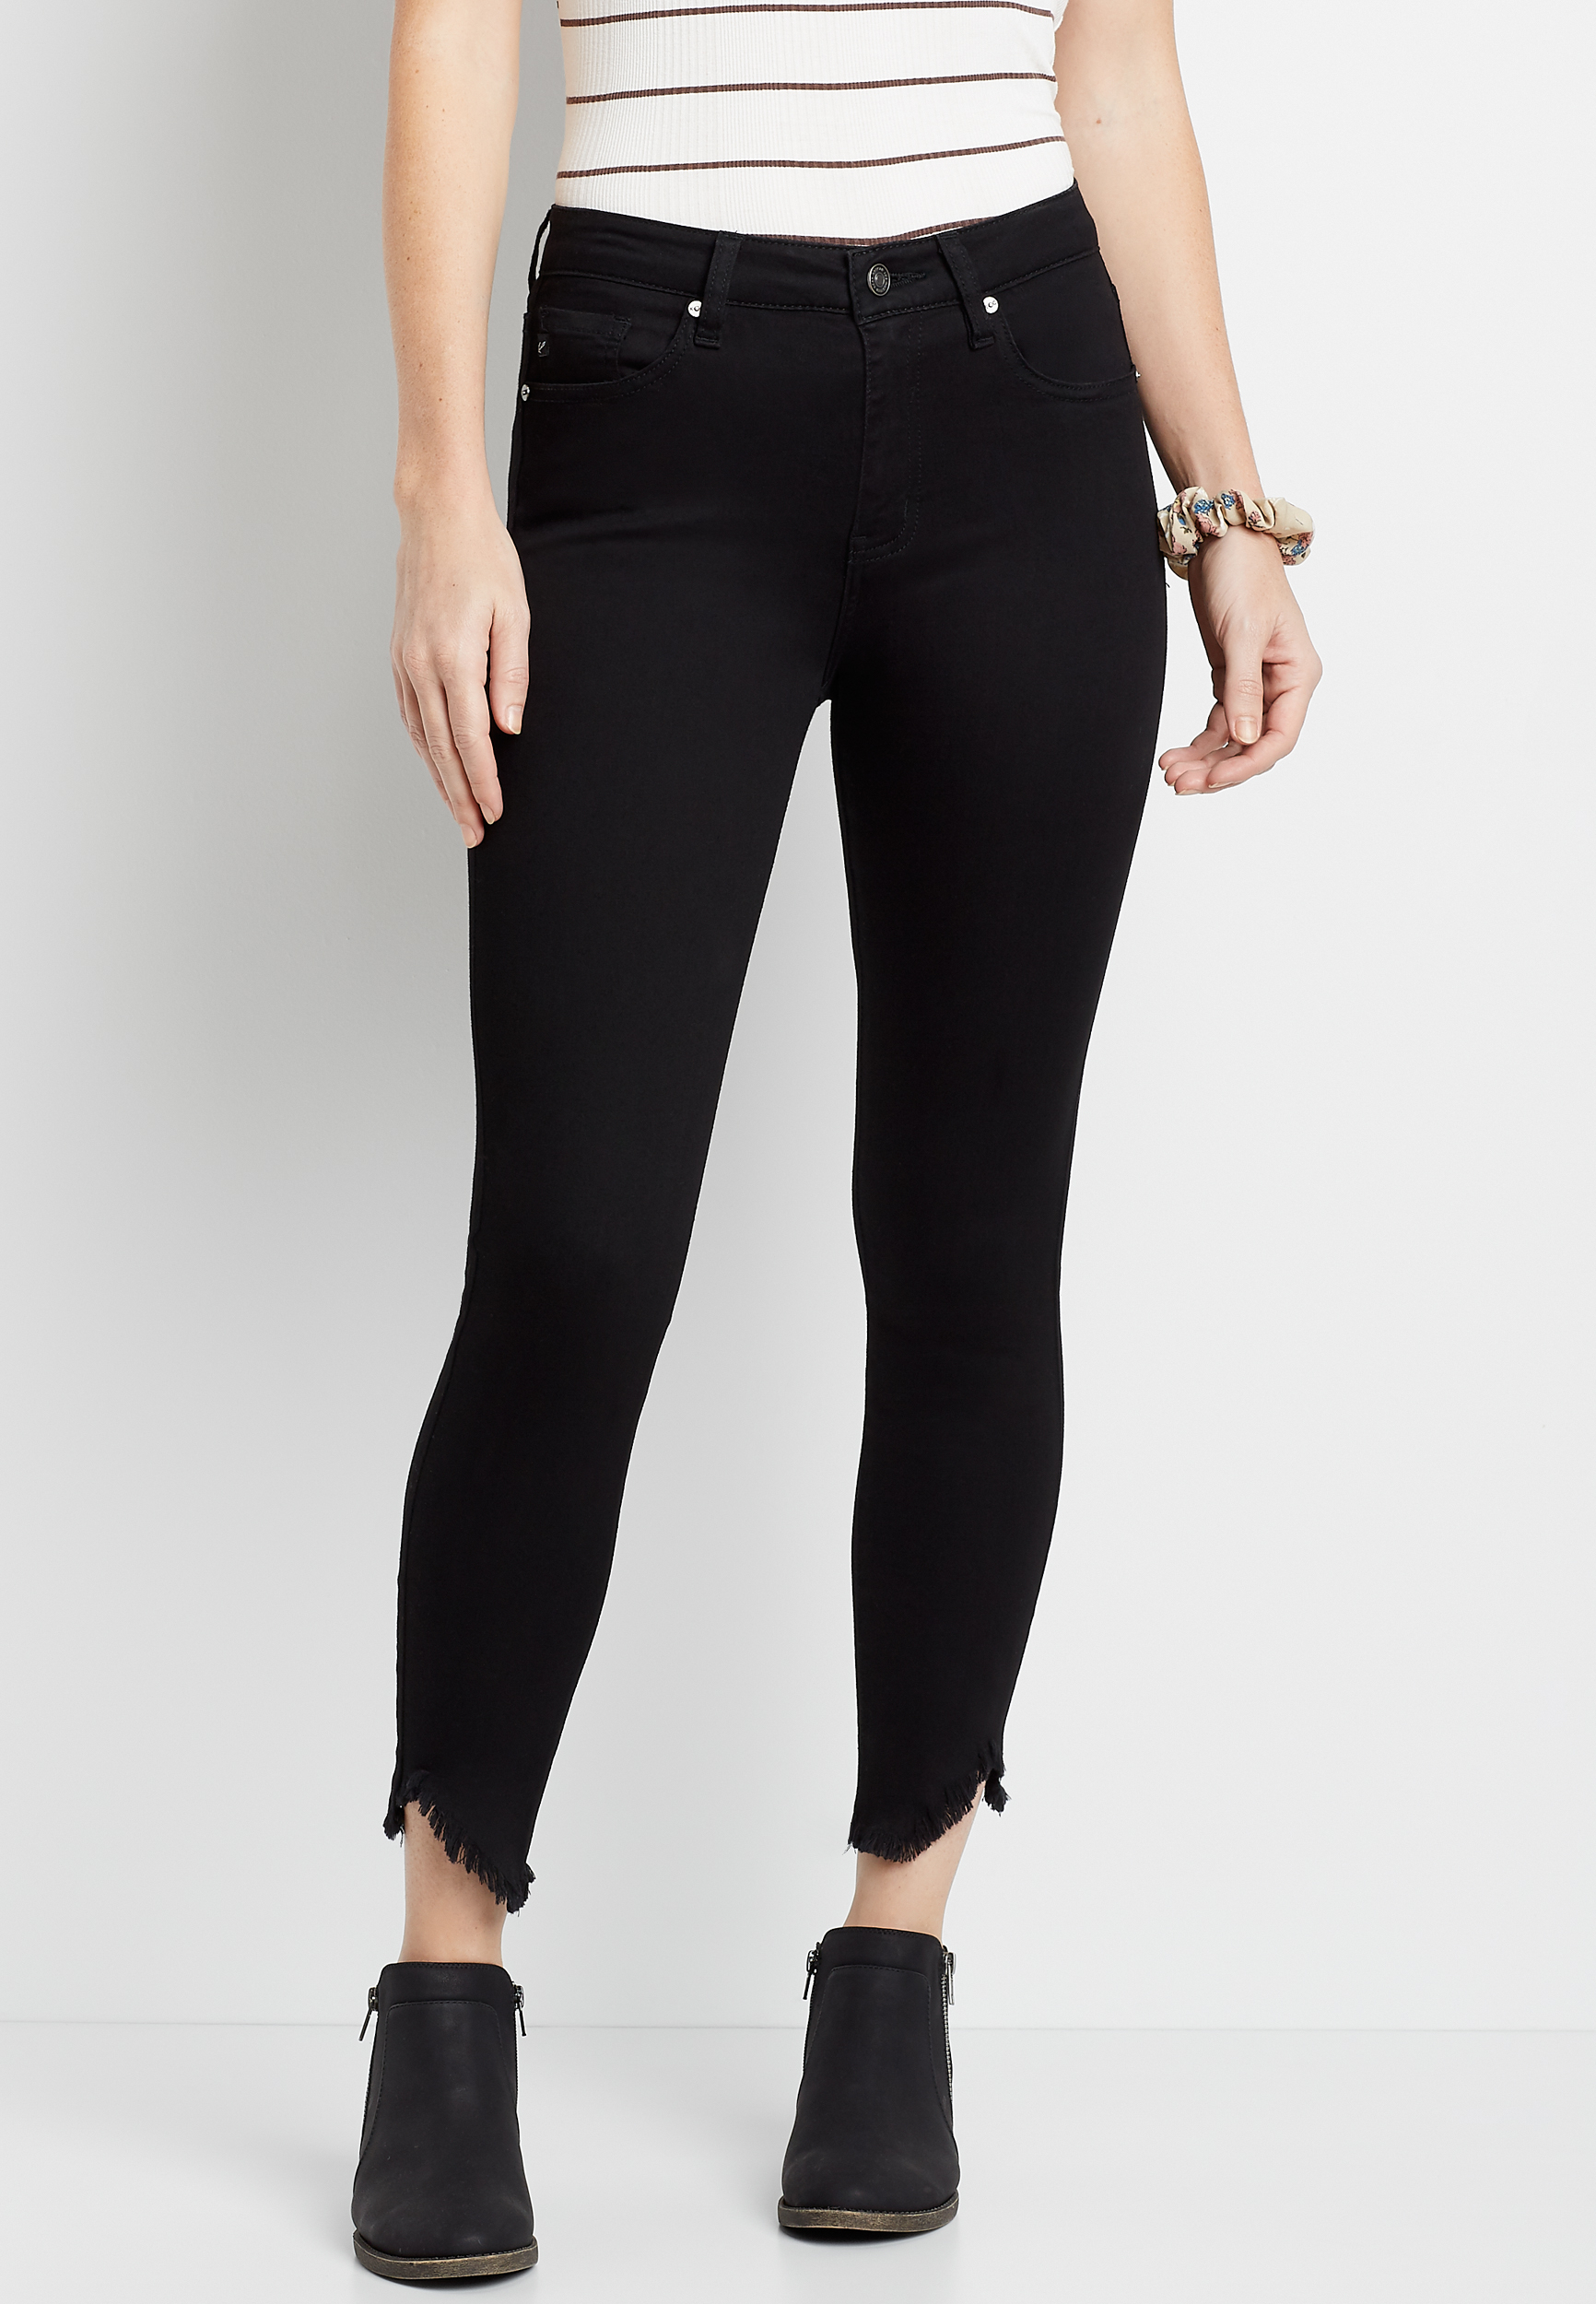 KanCan™ High Rise Black Ankle Skinny Jean | maurices